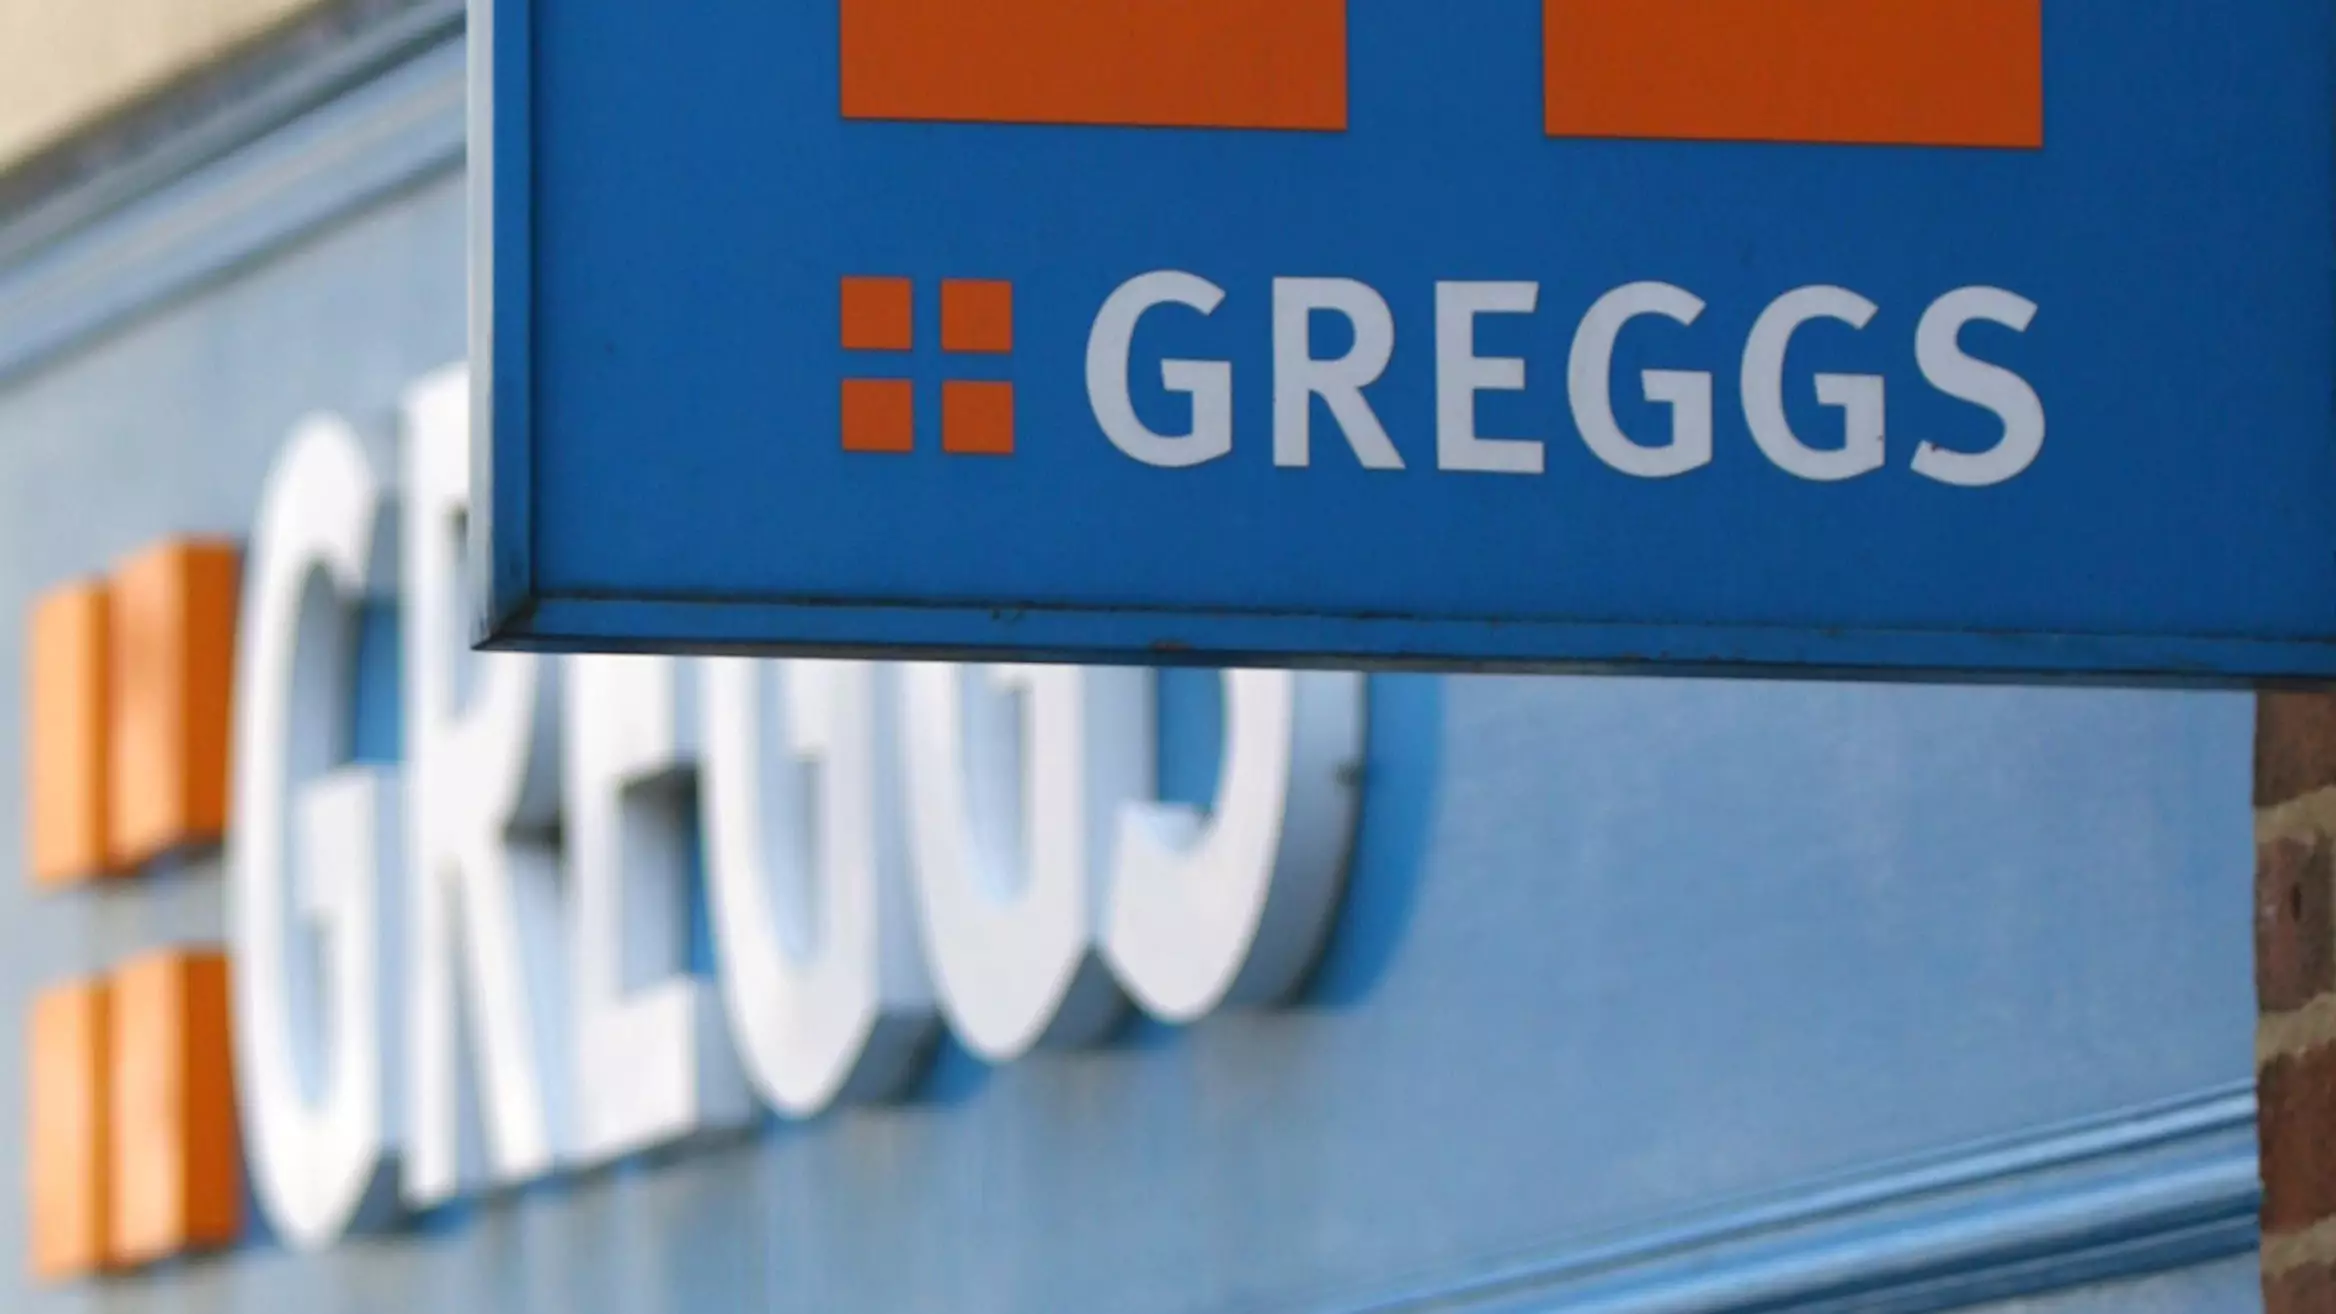 You Can Claim A Free Treat From Greggs If You Had A Birthday In Lockdown